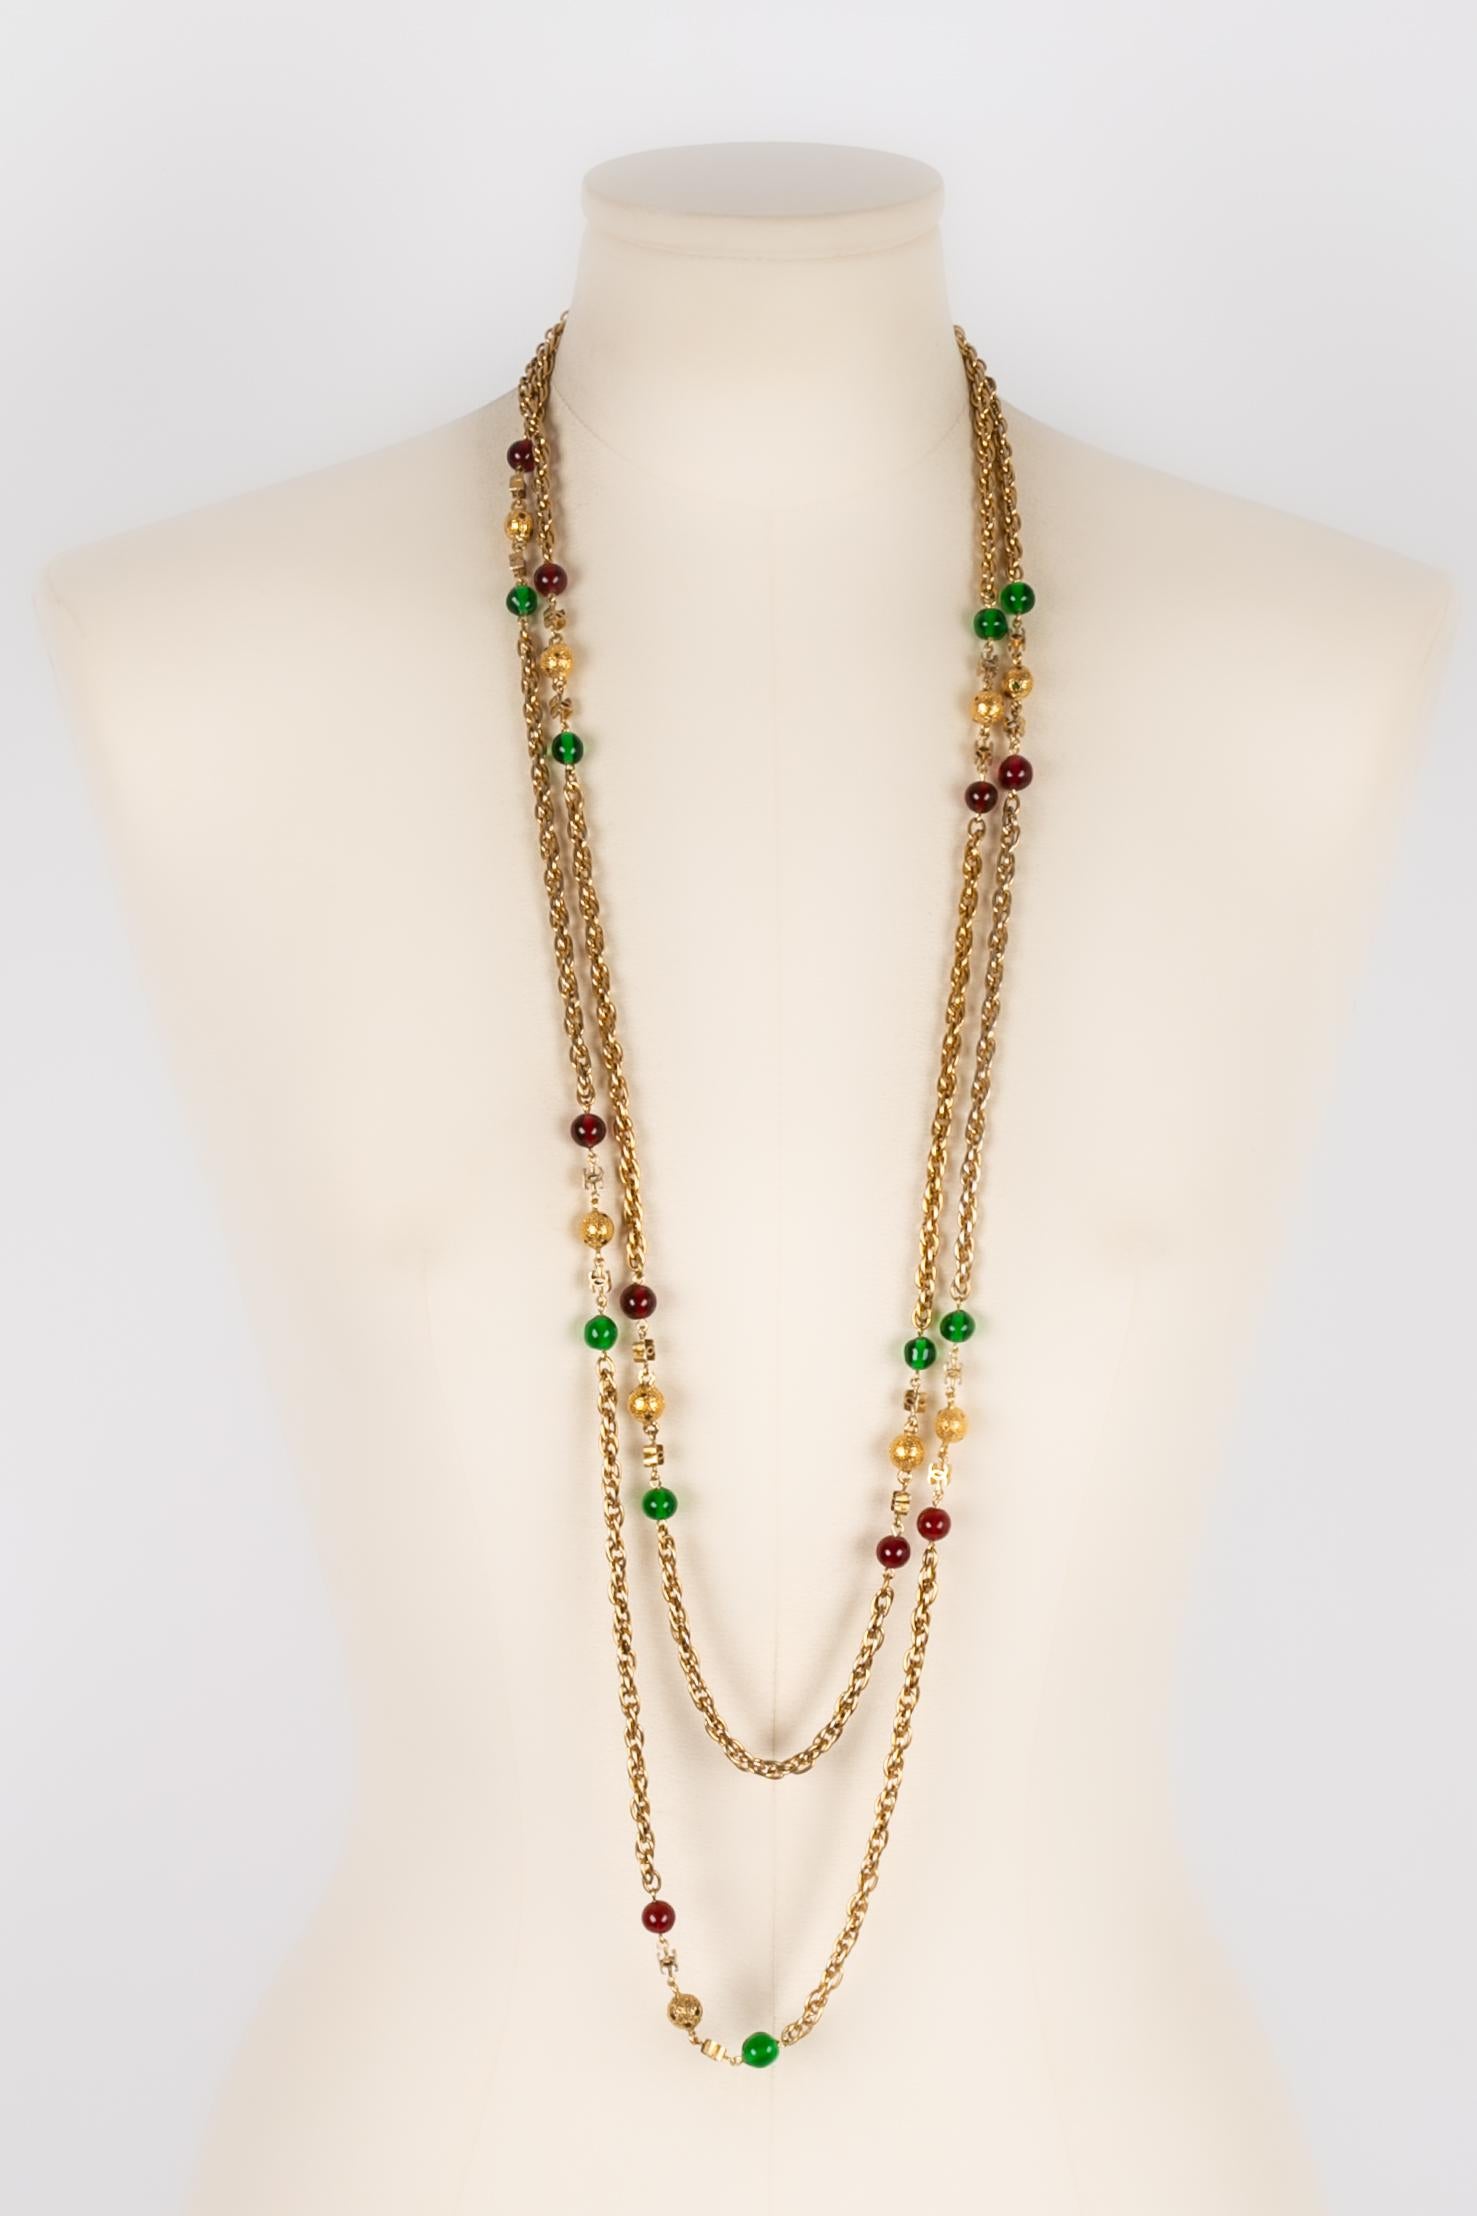 CHANEL(Made in France) Necklace / Long necklace in gold metal and red and green glass beads. Collection 1982.

Condition :
Very good condition

Length : 200 cm